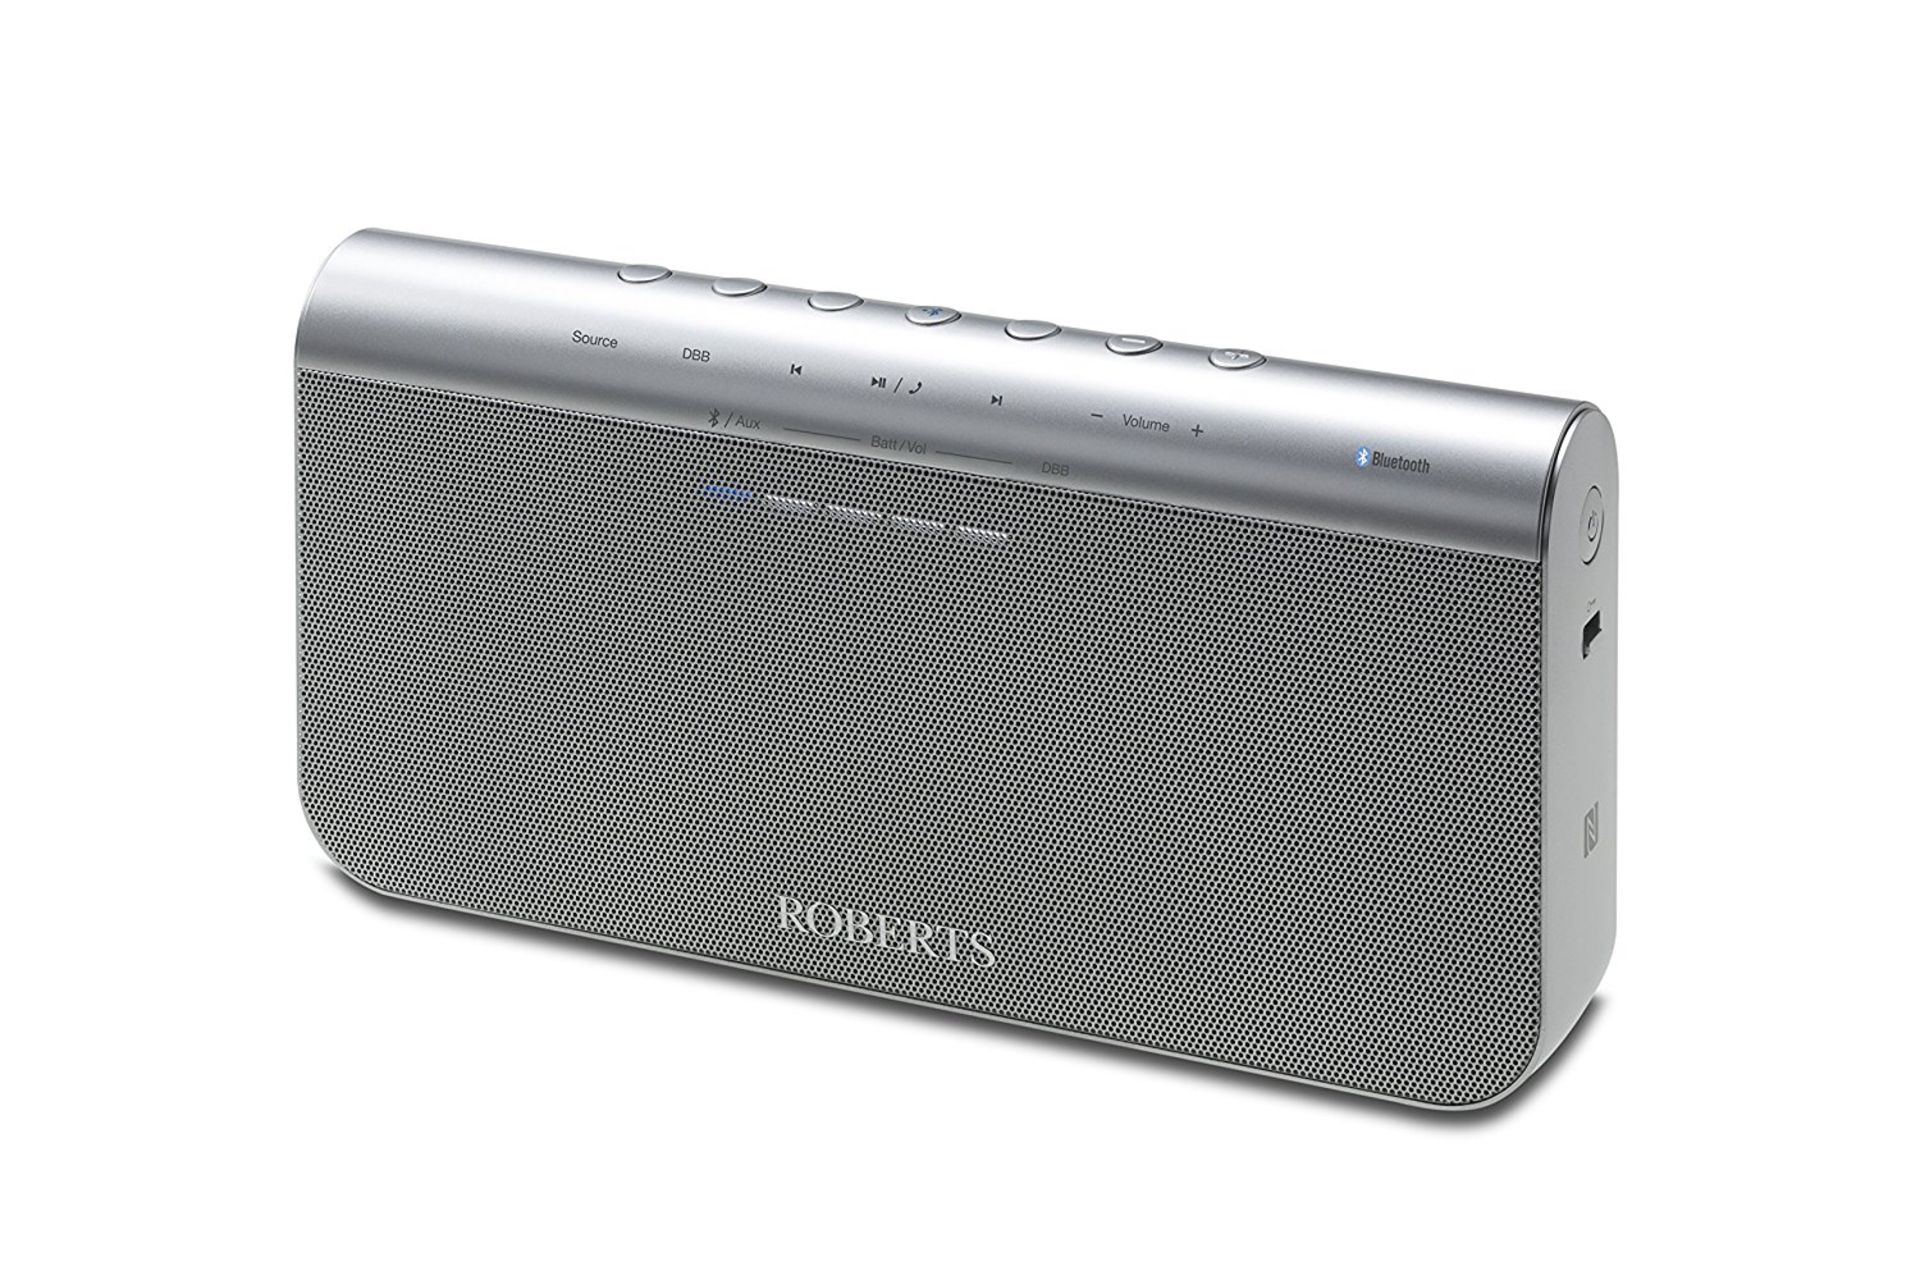 V Grade A Roberts BluPad Radio Portable Speaker With Built In Rechargable Battery And Leather